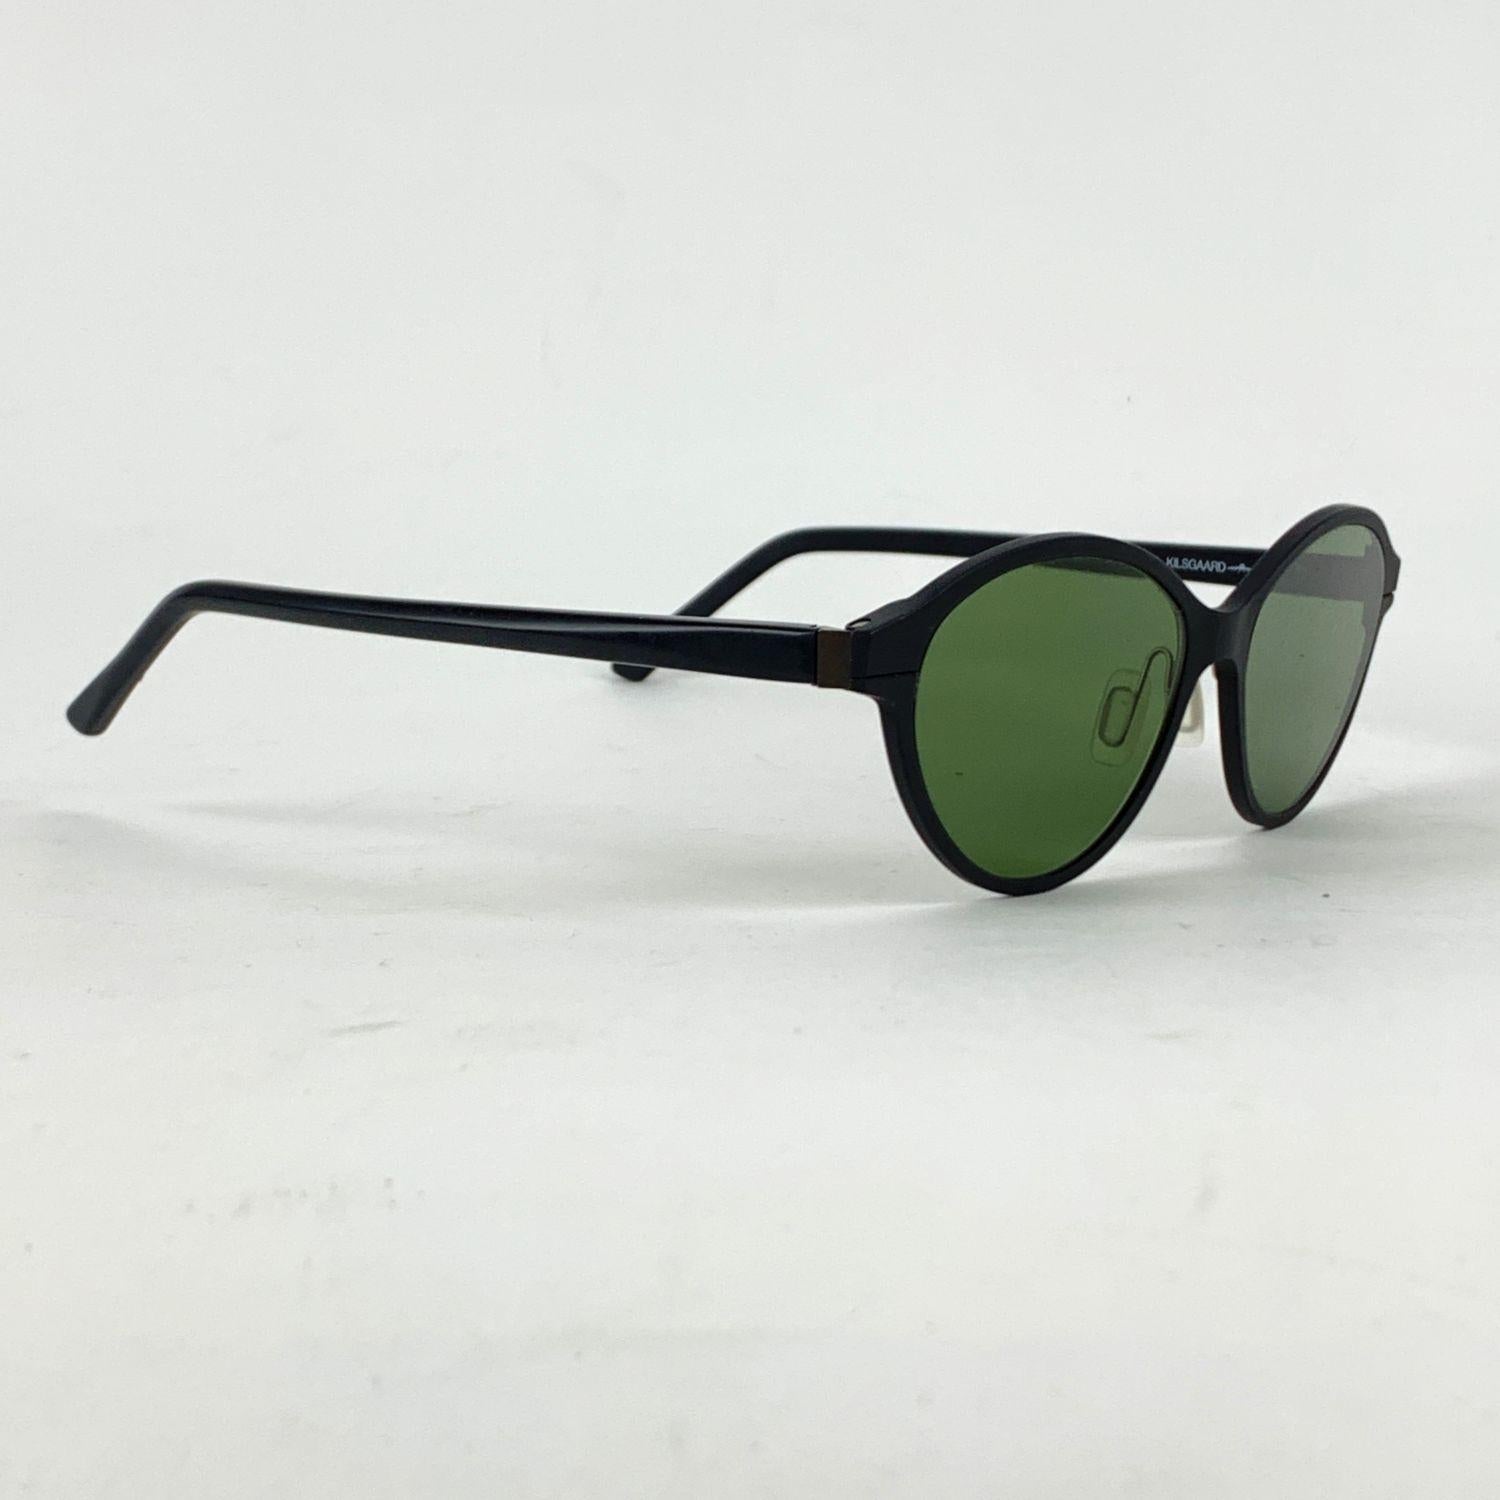 Elegant sunglasses by Kilsgaard, model 30. 1/1. Black classic frame. Designed in Denmark by Bonnelycke, Adjustable nose pads. Original green 100% UV protection lenses. Made in Italy. Style and Refs: 30 1/1 - 53/195 - 145

Details

MATERIAL: